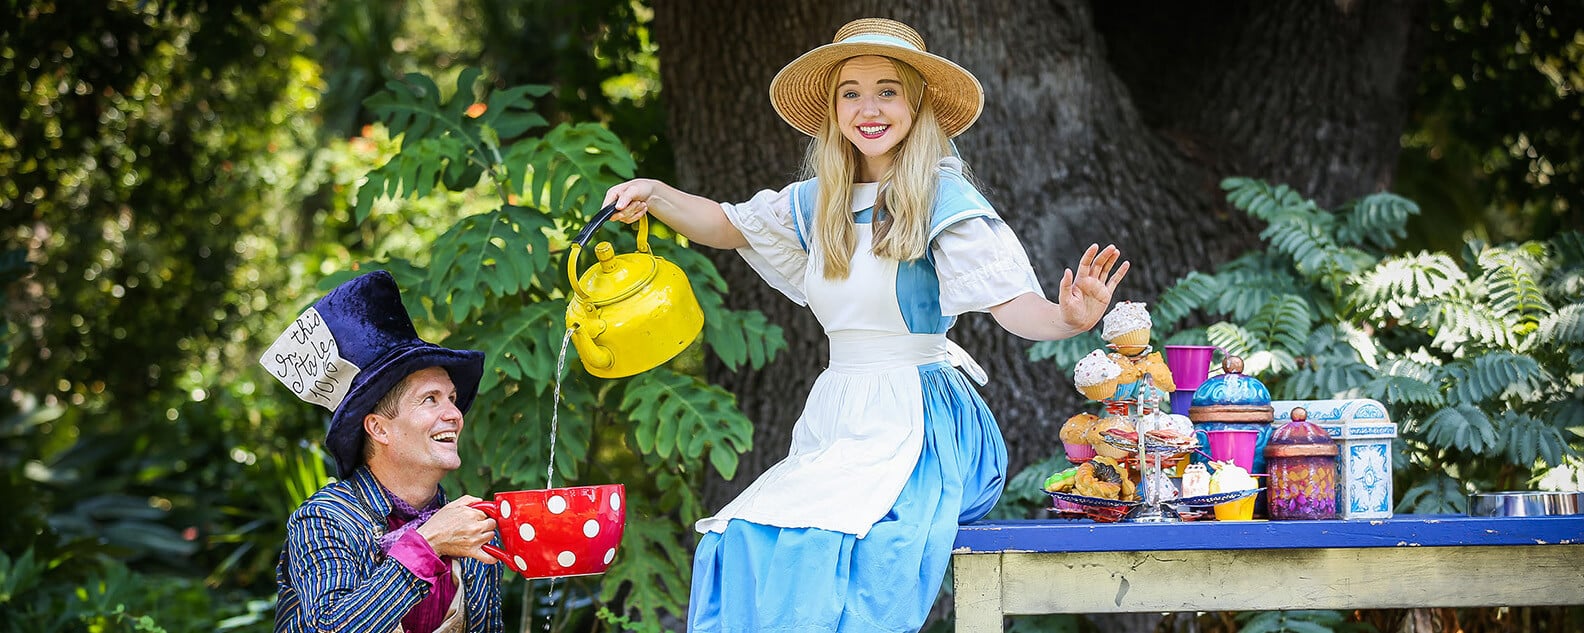 Venture Down the Rabbit Hole with Alice in Wonderland